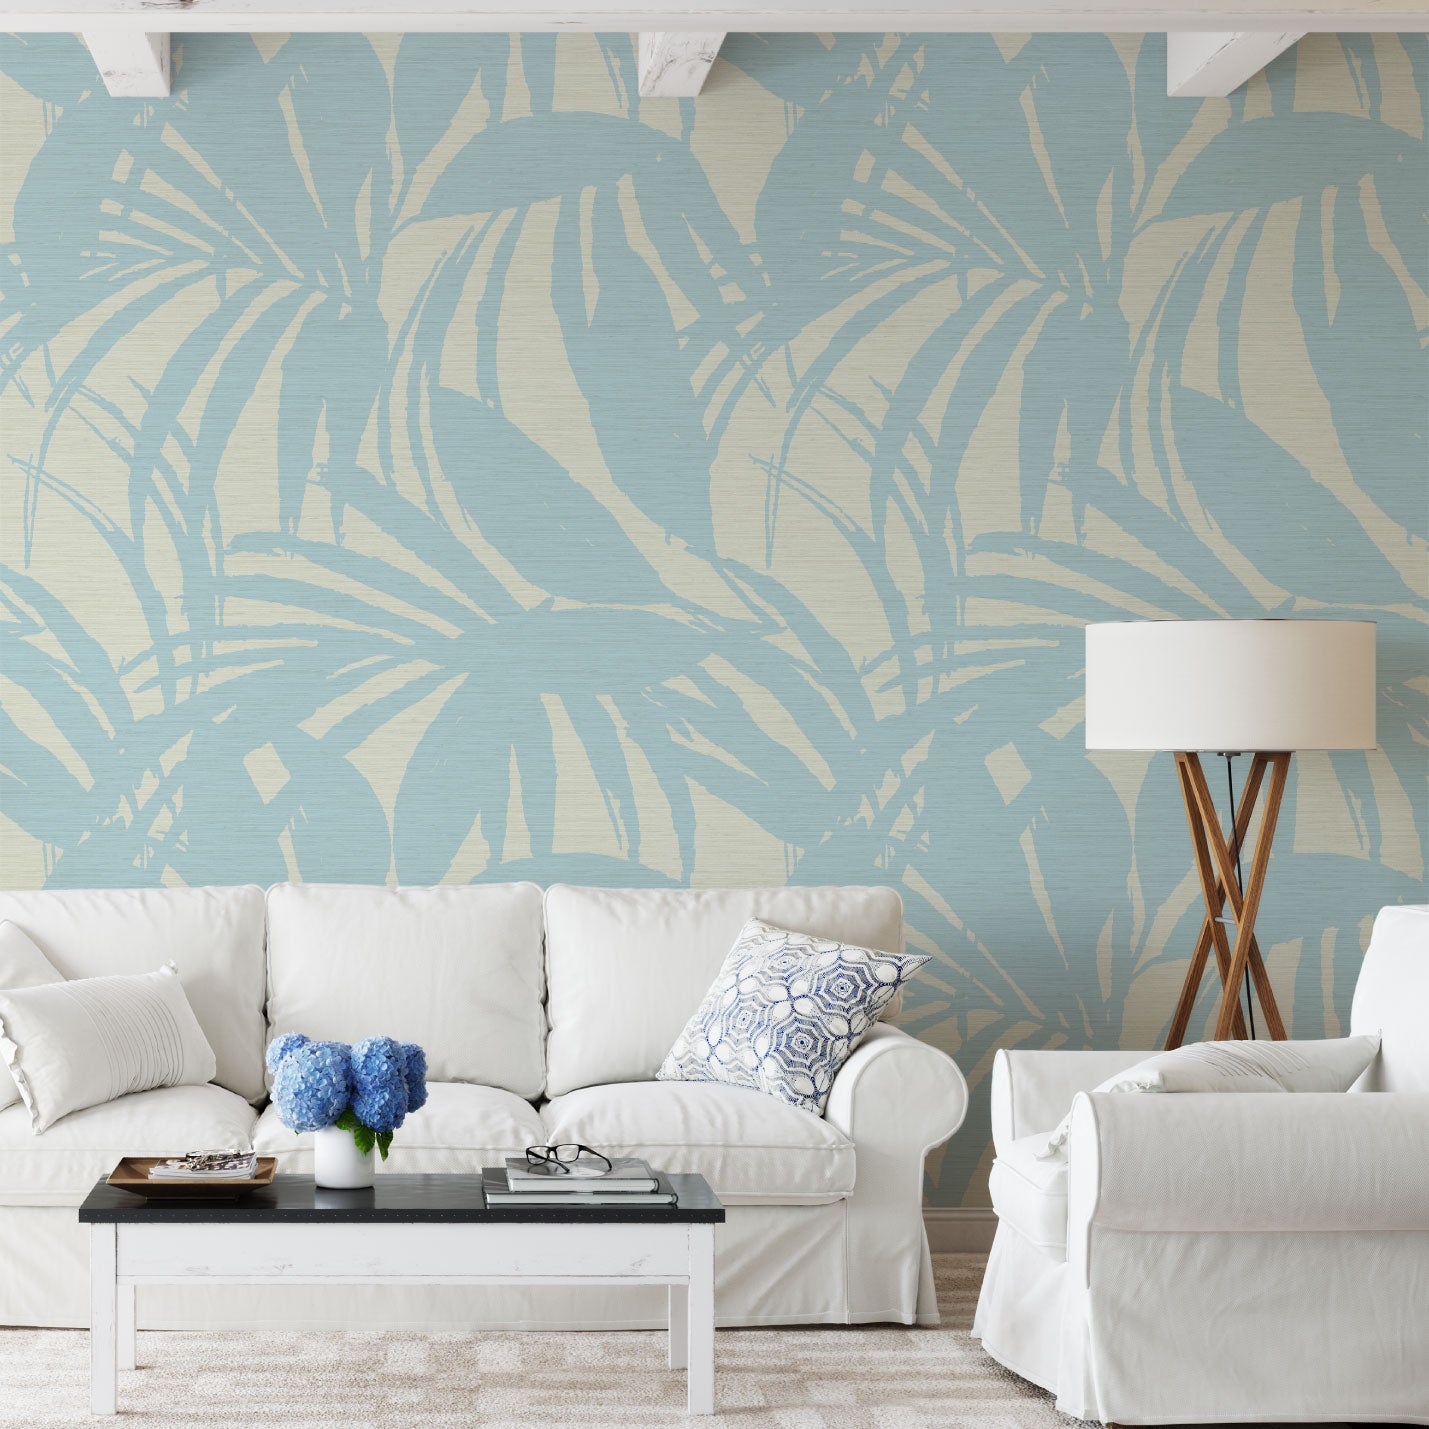 printed grasscloth wallpaper oversize tropical leaf Natural Textured Eco-Friendly Non-toxic High-quality  Sustainable practices Sustainability Interior Design Wall covering Bold retro chic custom jungle garden botanical Seaside Coastal Seashore Waterfront Vacation home styling Retreat Relaxed beach vibes Beach cottage Shoreline Oceanfront white blue sky ocean living room